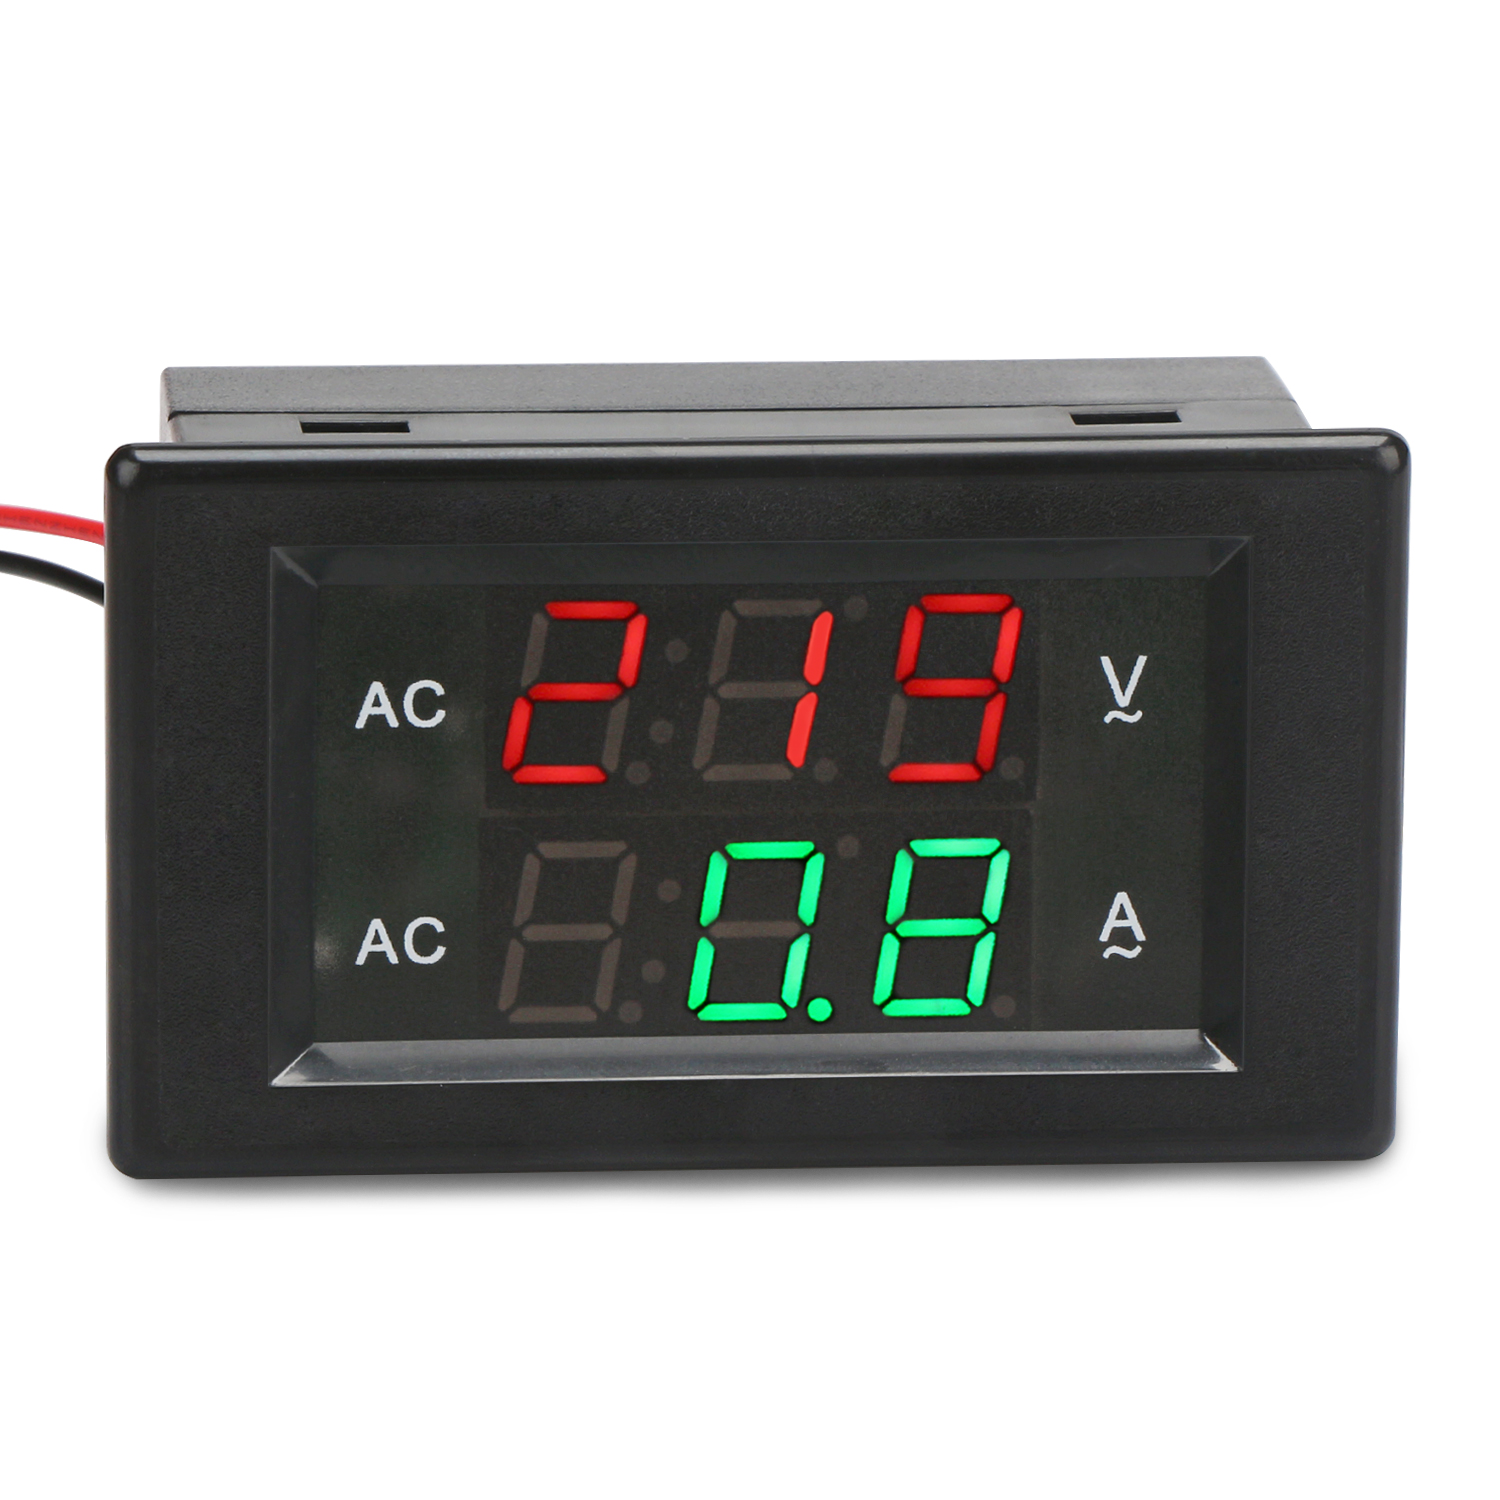 Digital AC100-300V 0-100A LCD Double DISPLAY PANEL VOLT/AMP Meter WITH Case 